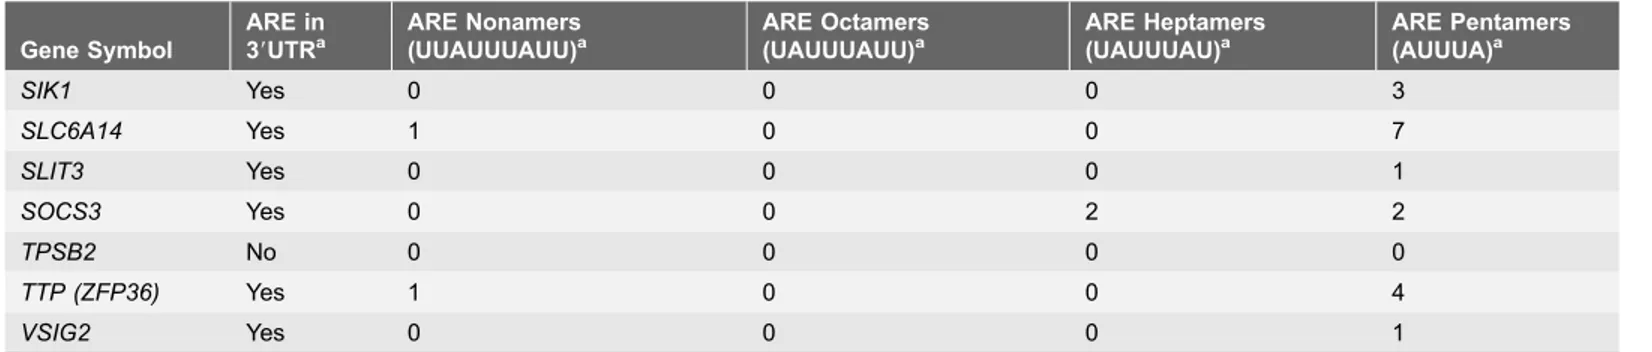 Table 1. Cont. Gene Symbol ARE in3 9 UTR a ARE Nonamers(UUAUUUAUU) a ARE Octamers(UAUUUAUU)a ARE Heptamers(UAUUUAU)a ARE Pentamers(AUUUA)a SIK1 Yes 0 0 0 3 SLC6A14 Yes 1 0 0 7 SLIT3 Yes 0 0 0 1 SOCS3 Yes 0 0 2 2 TPSB2 No 0 0 0 0 TTP (ZFP36) Yes 1 0 0 4 VSI